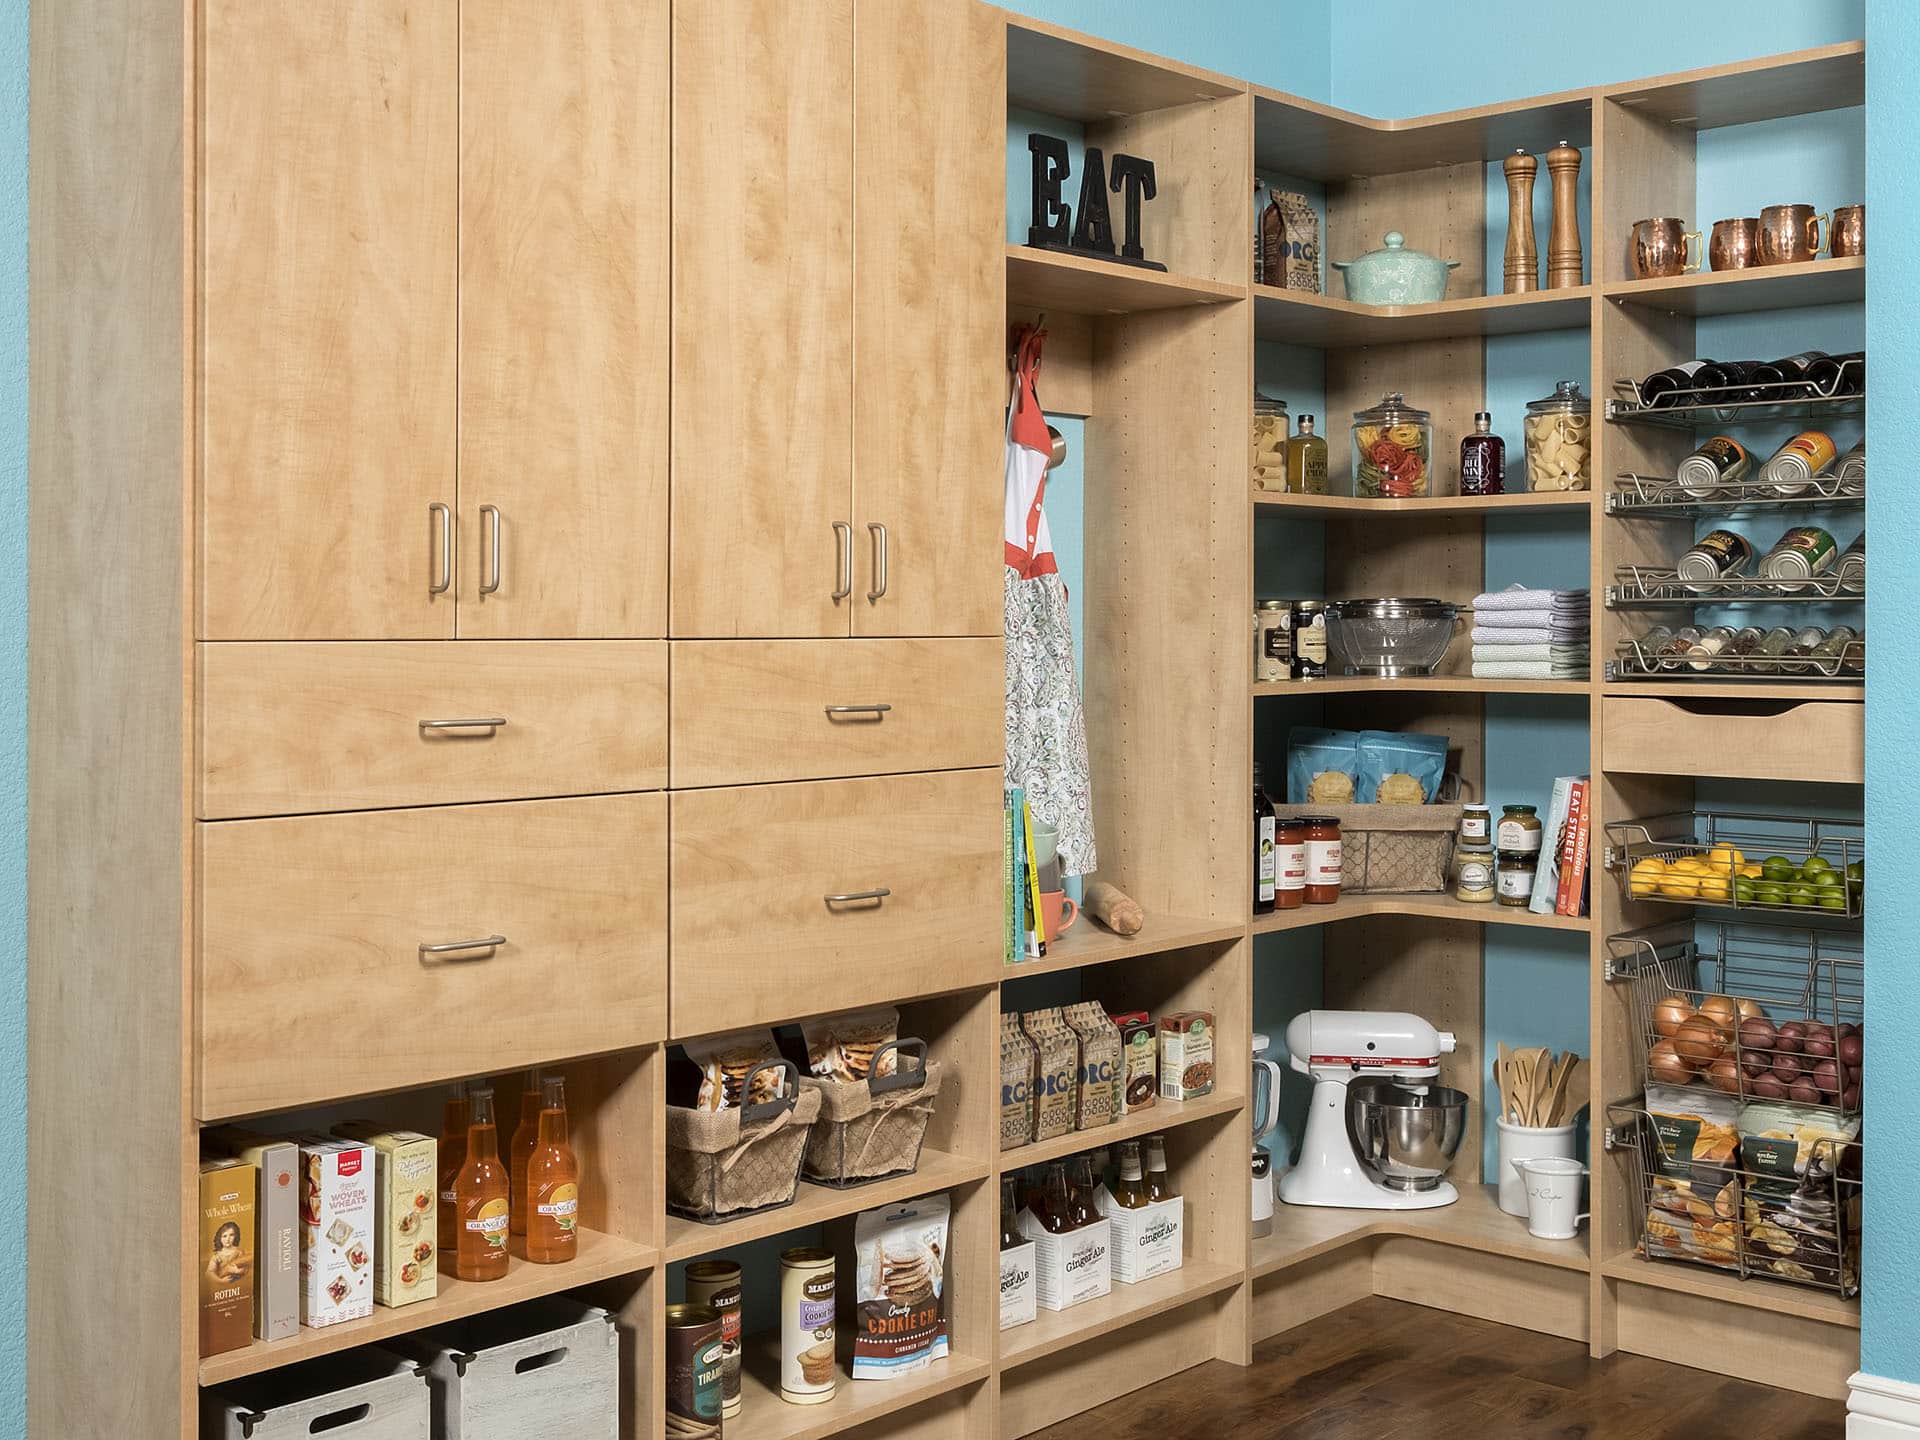 What Materials Are Commonly Used for Butler’s Pantry Cabinets?